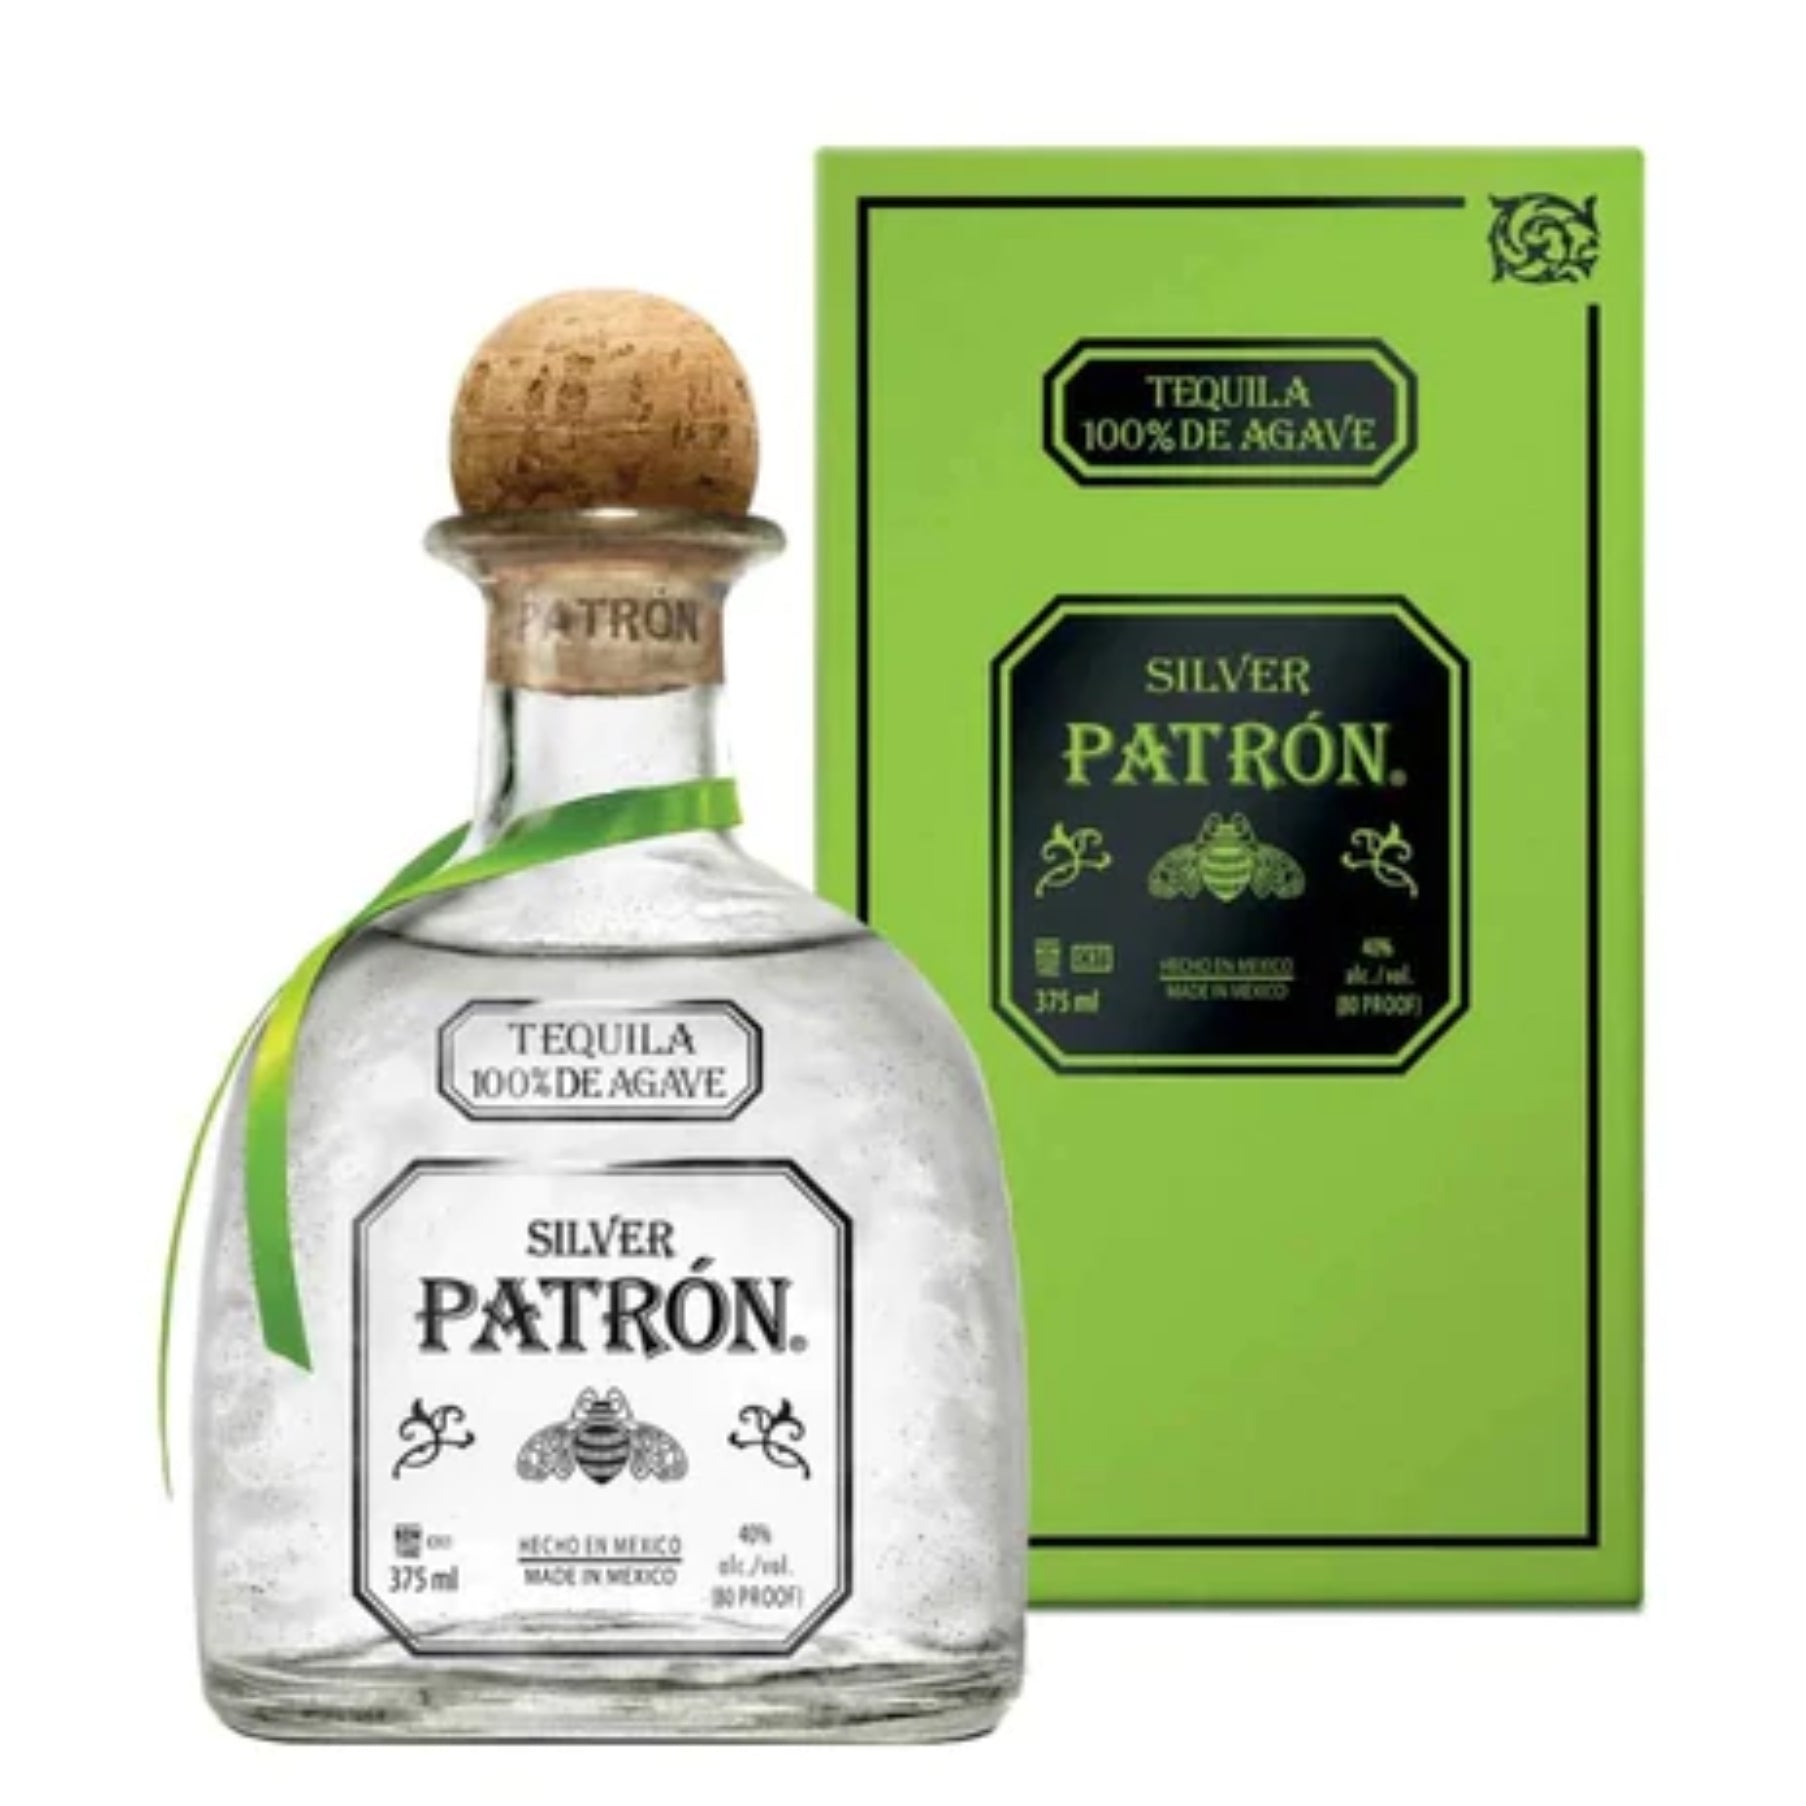 Patron Pineapple Cocktail - Drinks with Patron - Patron Silver and